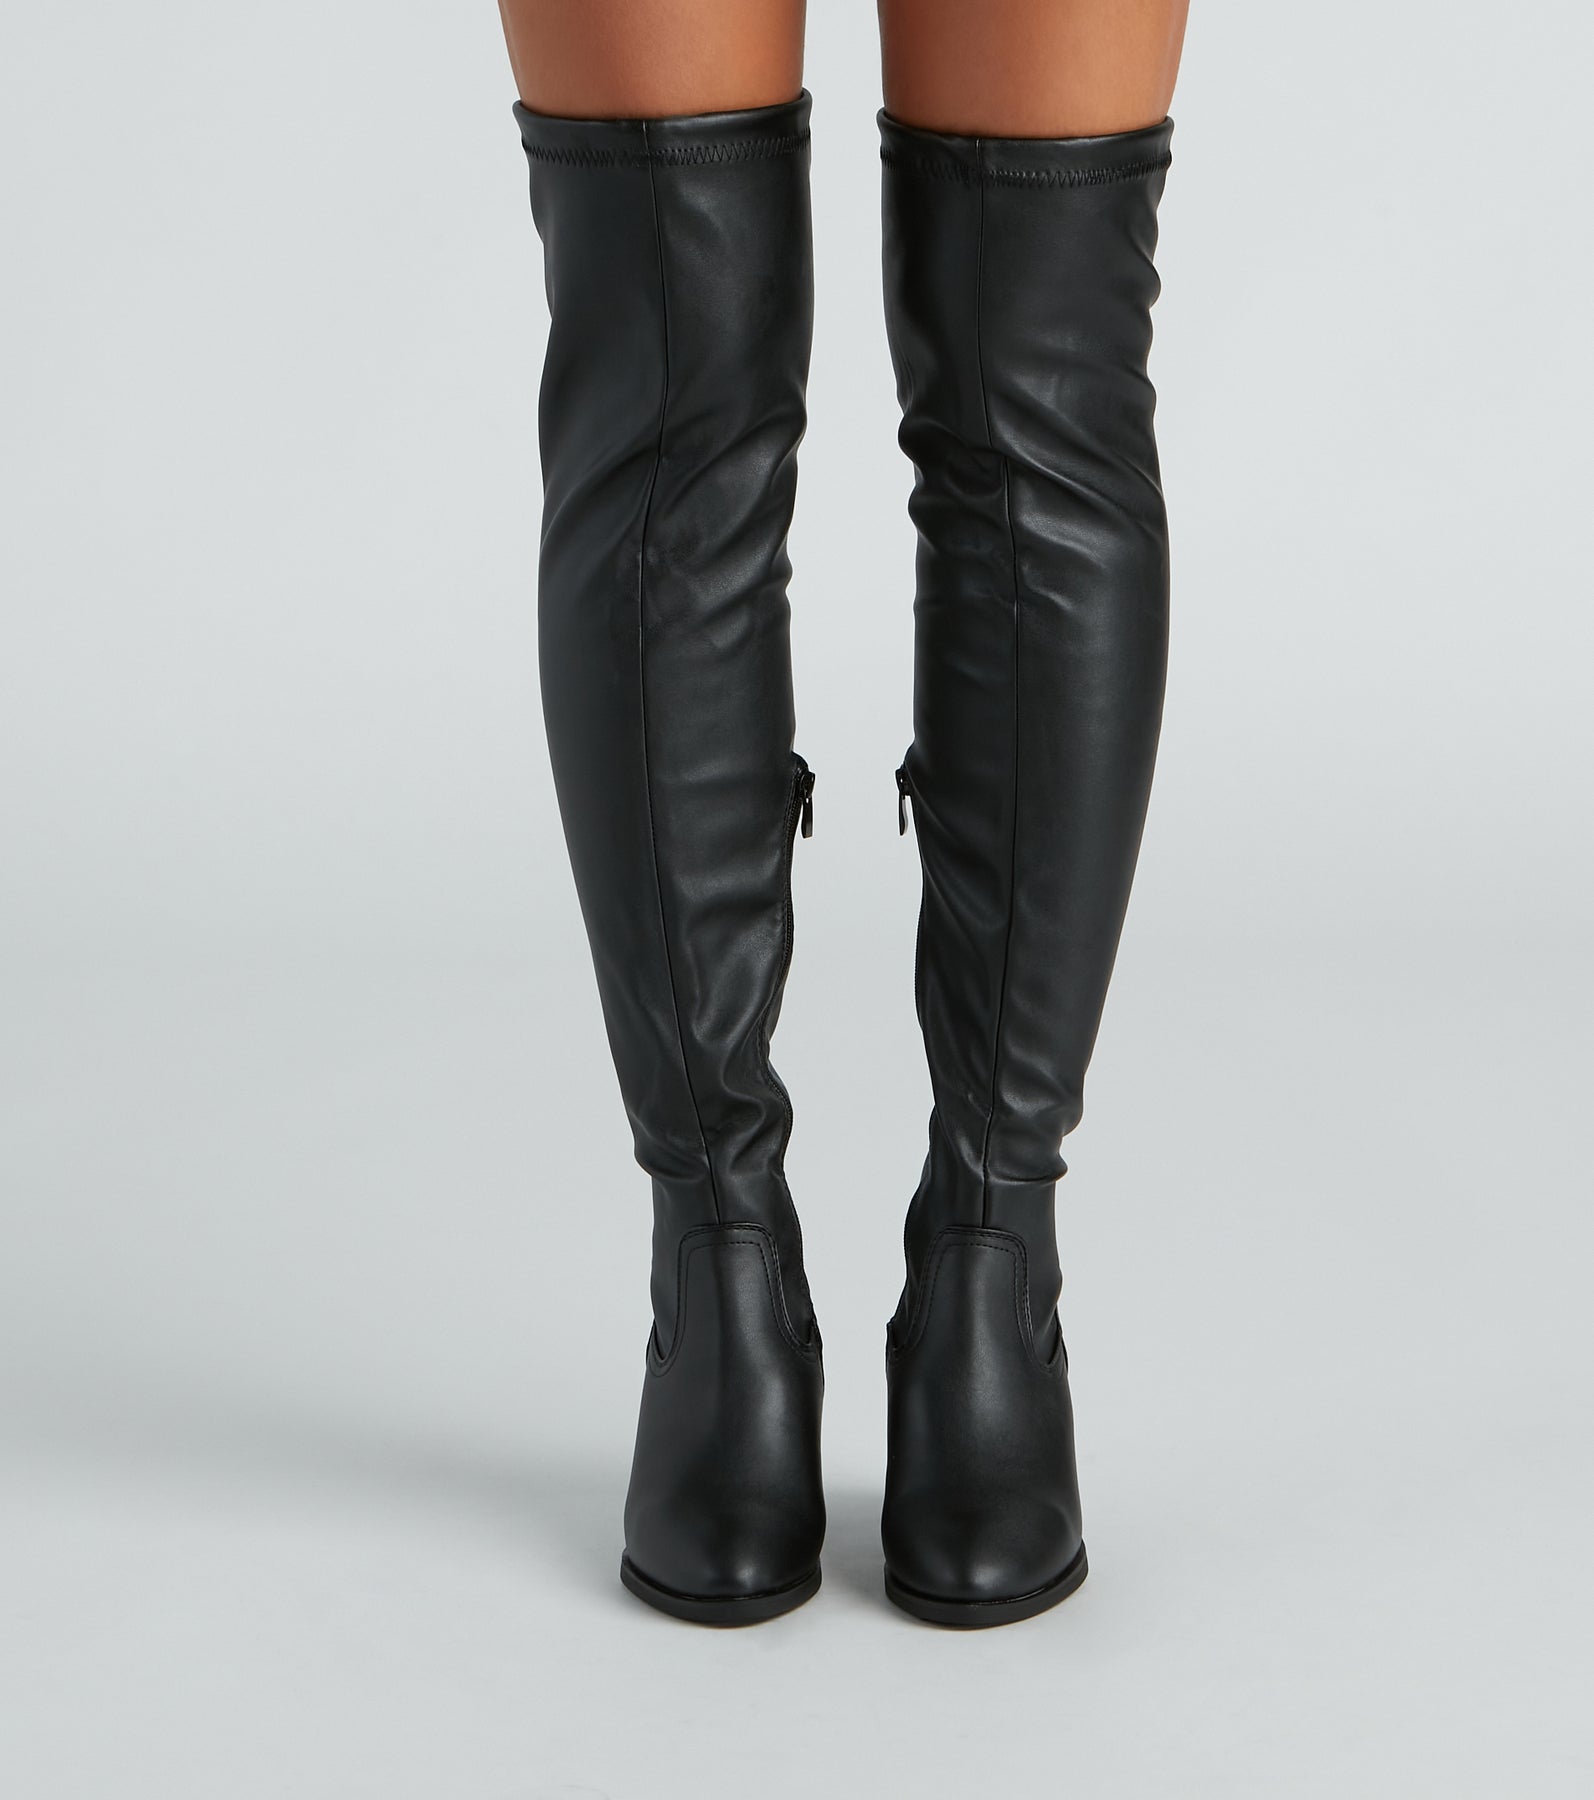 Made For Struts Over The Knee Boots & Windsor